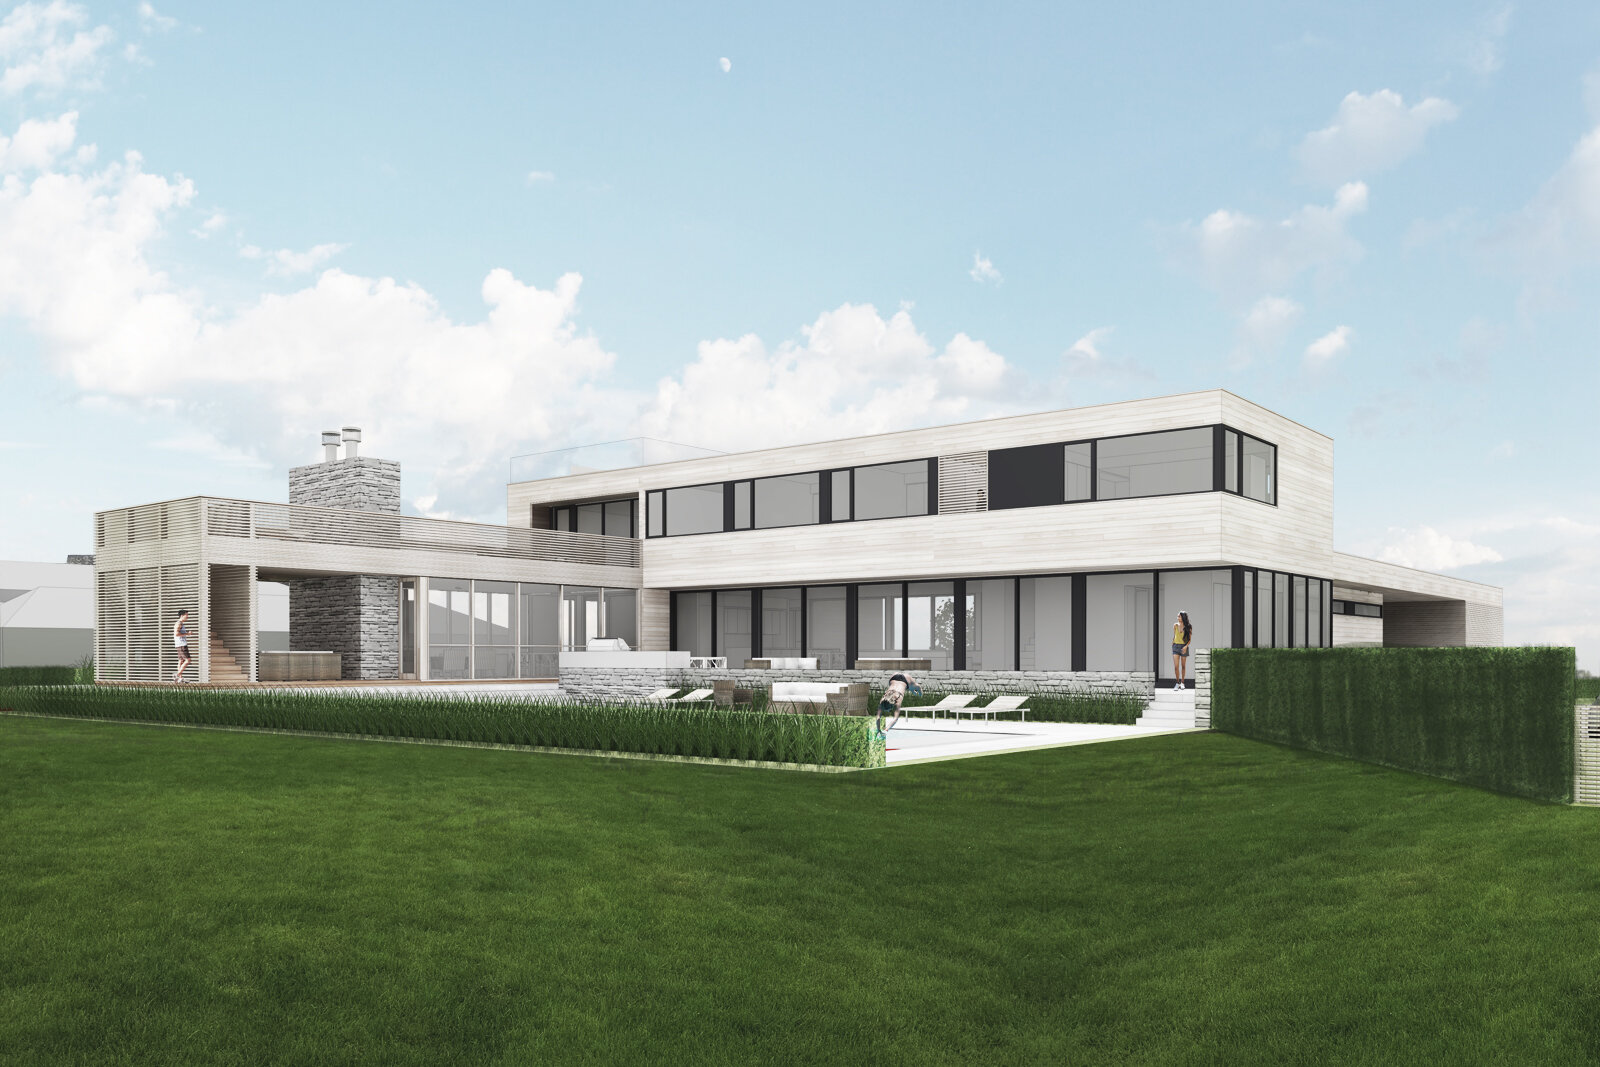 02-res4-resolution-4-architecture-modern-modular-house-prefab-home-quogue-residence-exterior-rendering.jpg